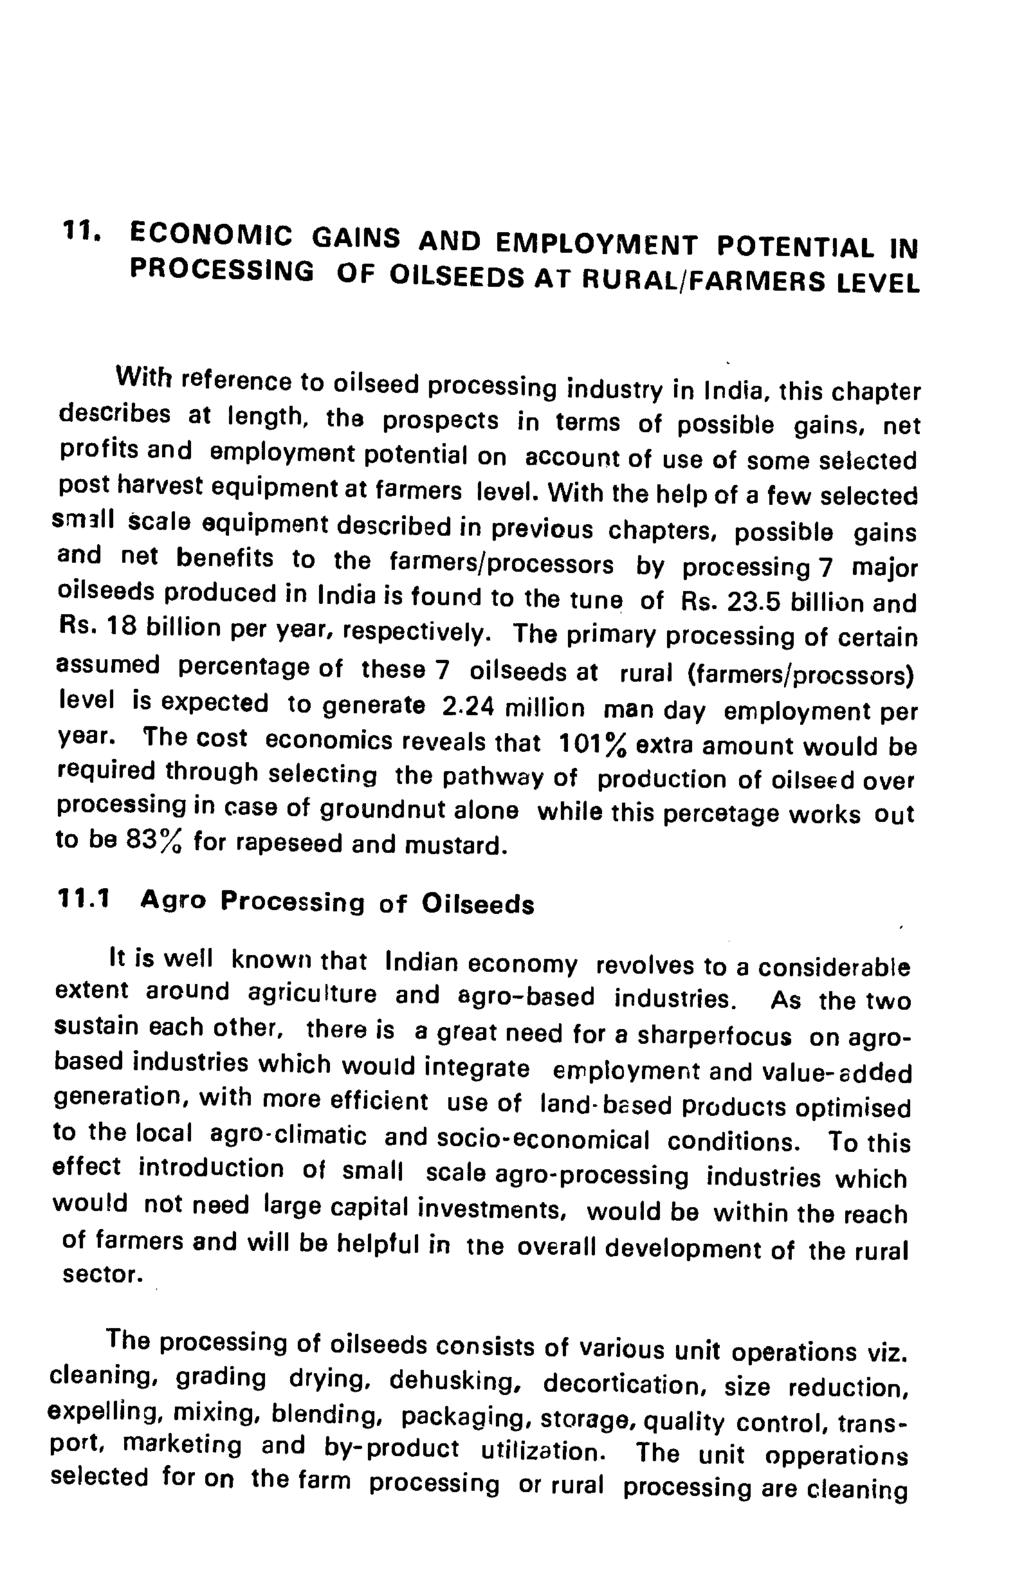 11. ECONOMIC GAINS AND EMPLOYMENT POTENTIAL IN PROCESSING OF OILSEEDS AT RURAL/FARMERS LEVEL With reference to oilseed processing industry in India, this chapter describes at length, the prospects in